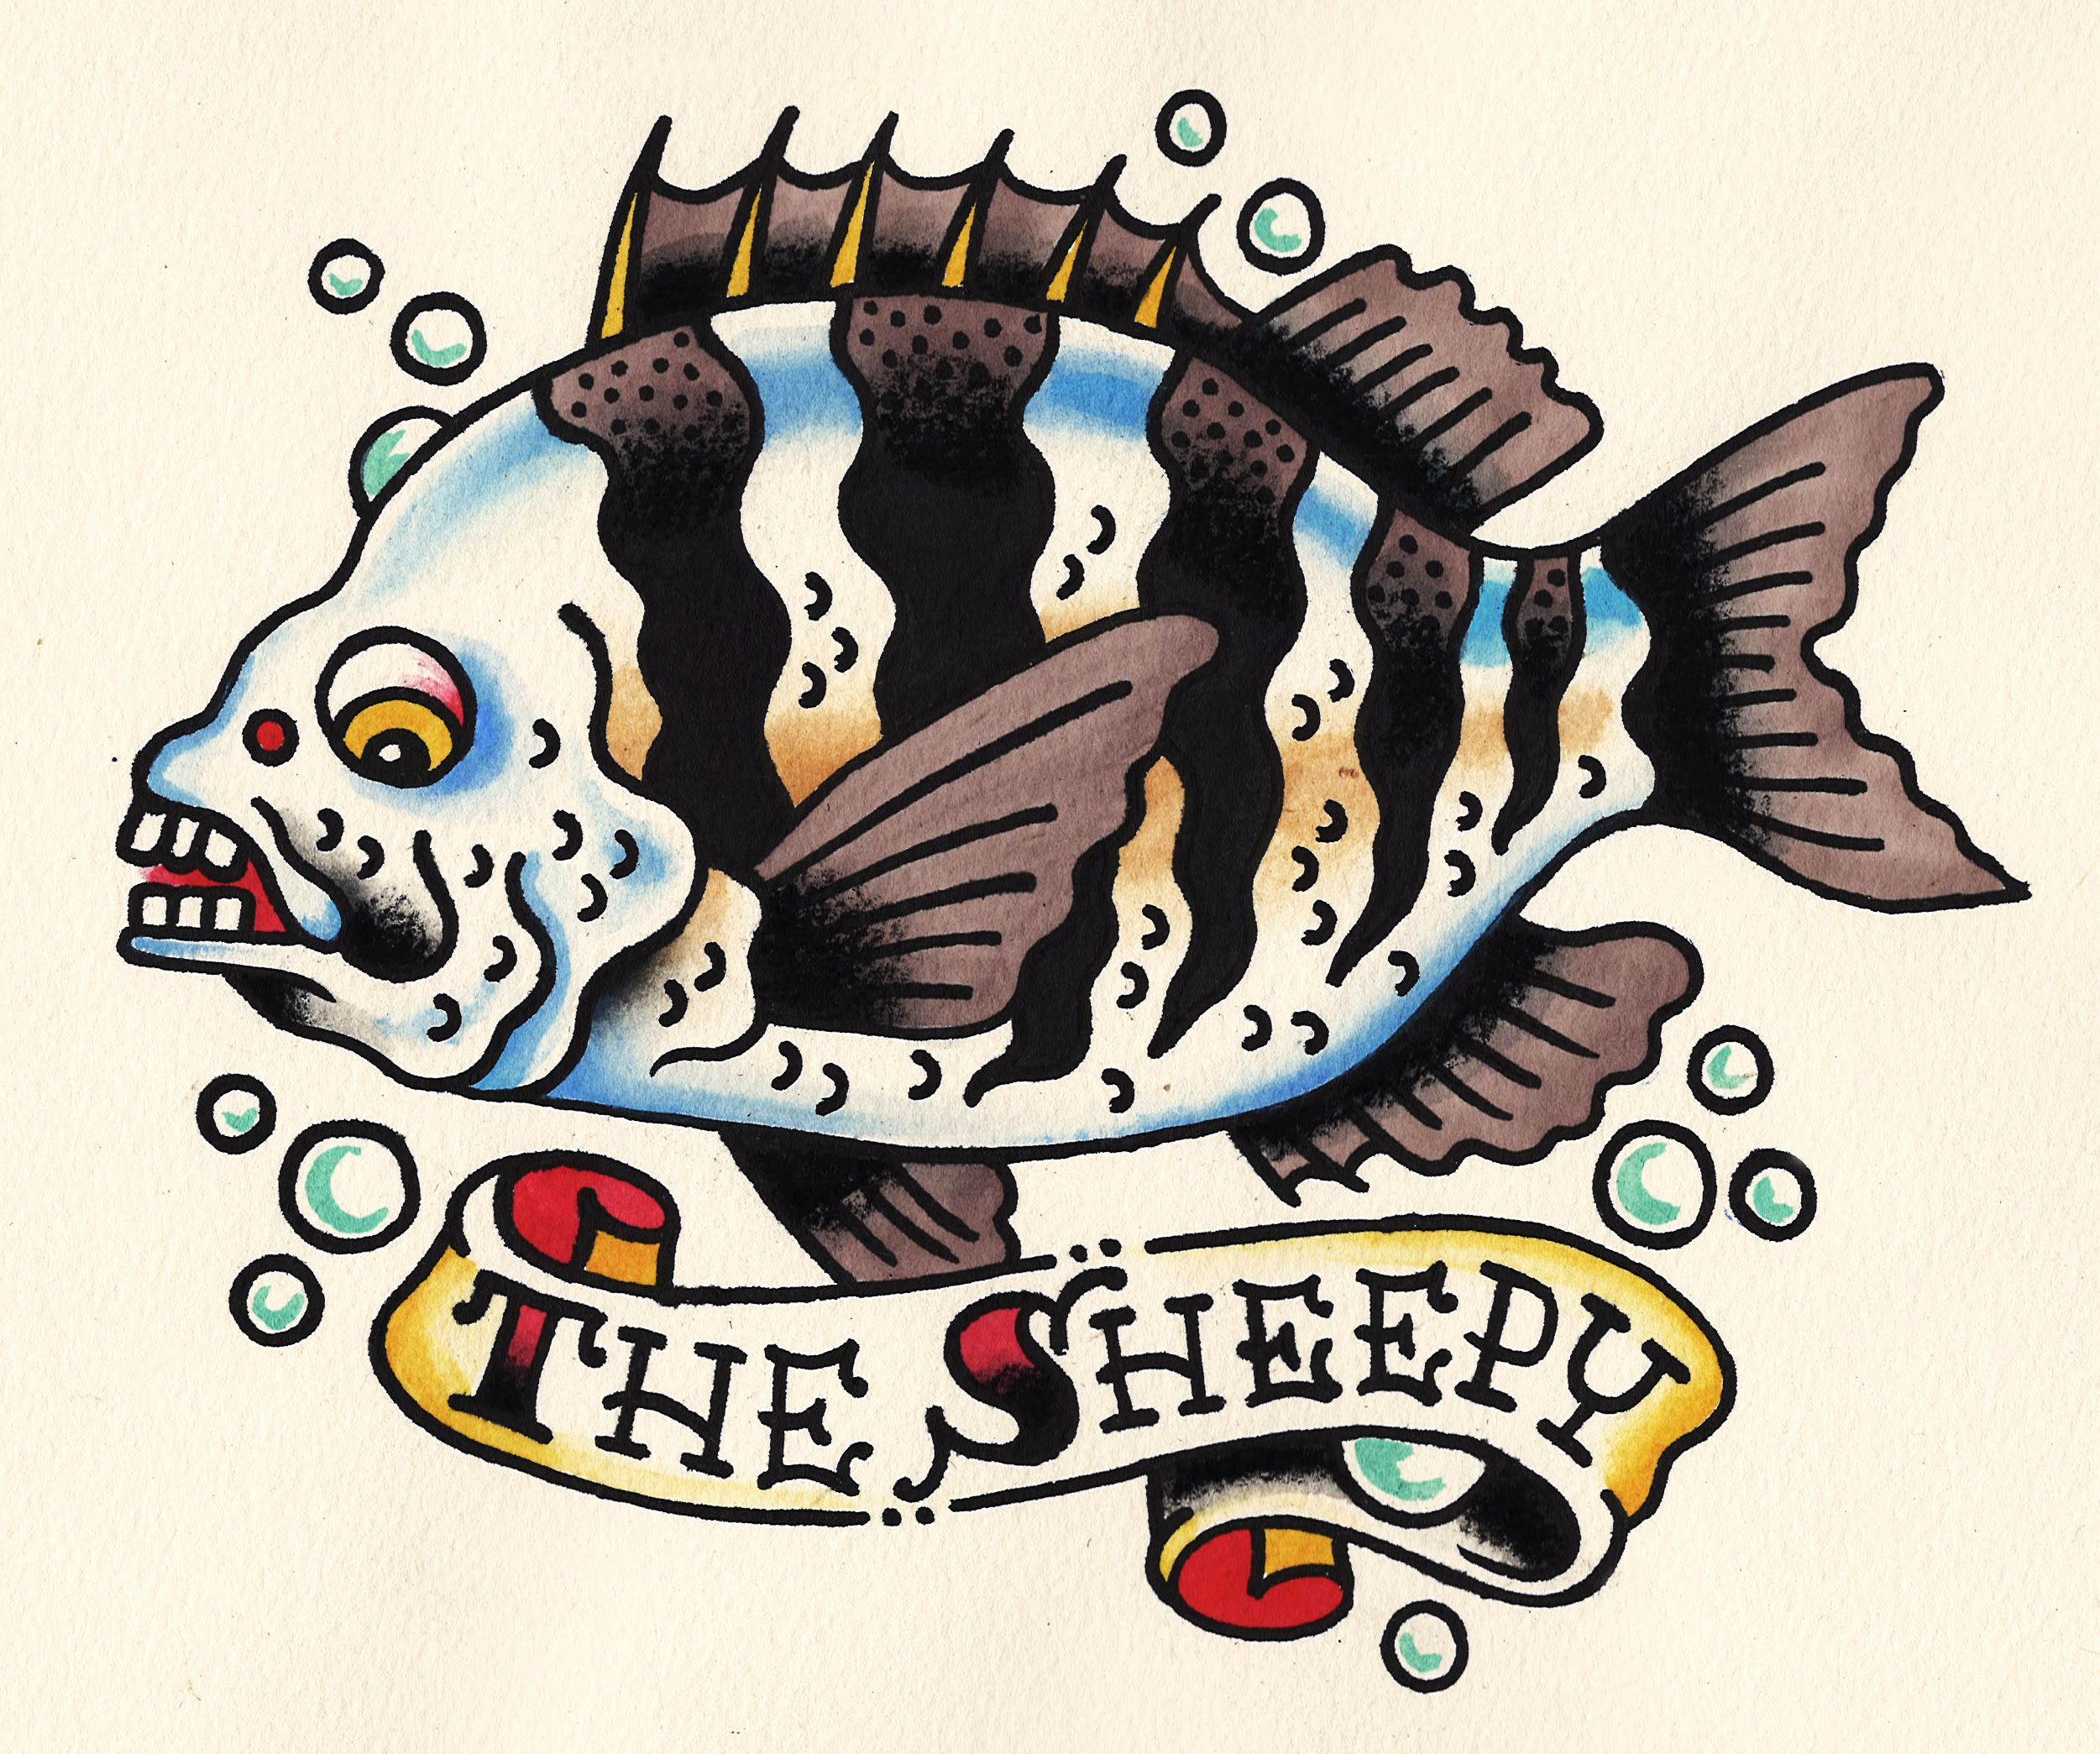 The Sheepy Fly Fishing Tournament